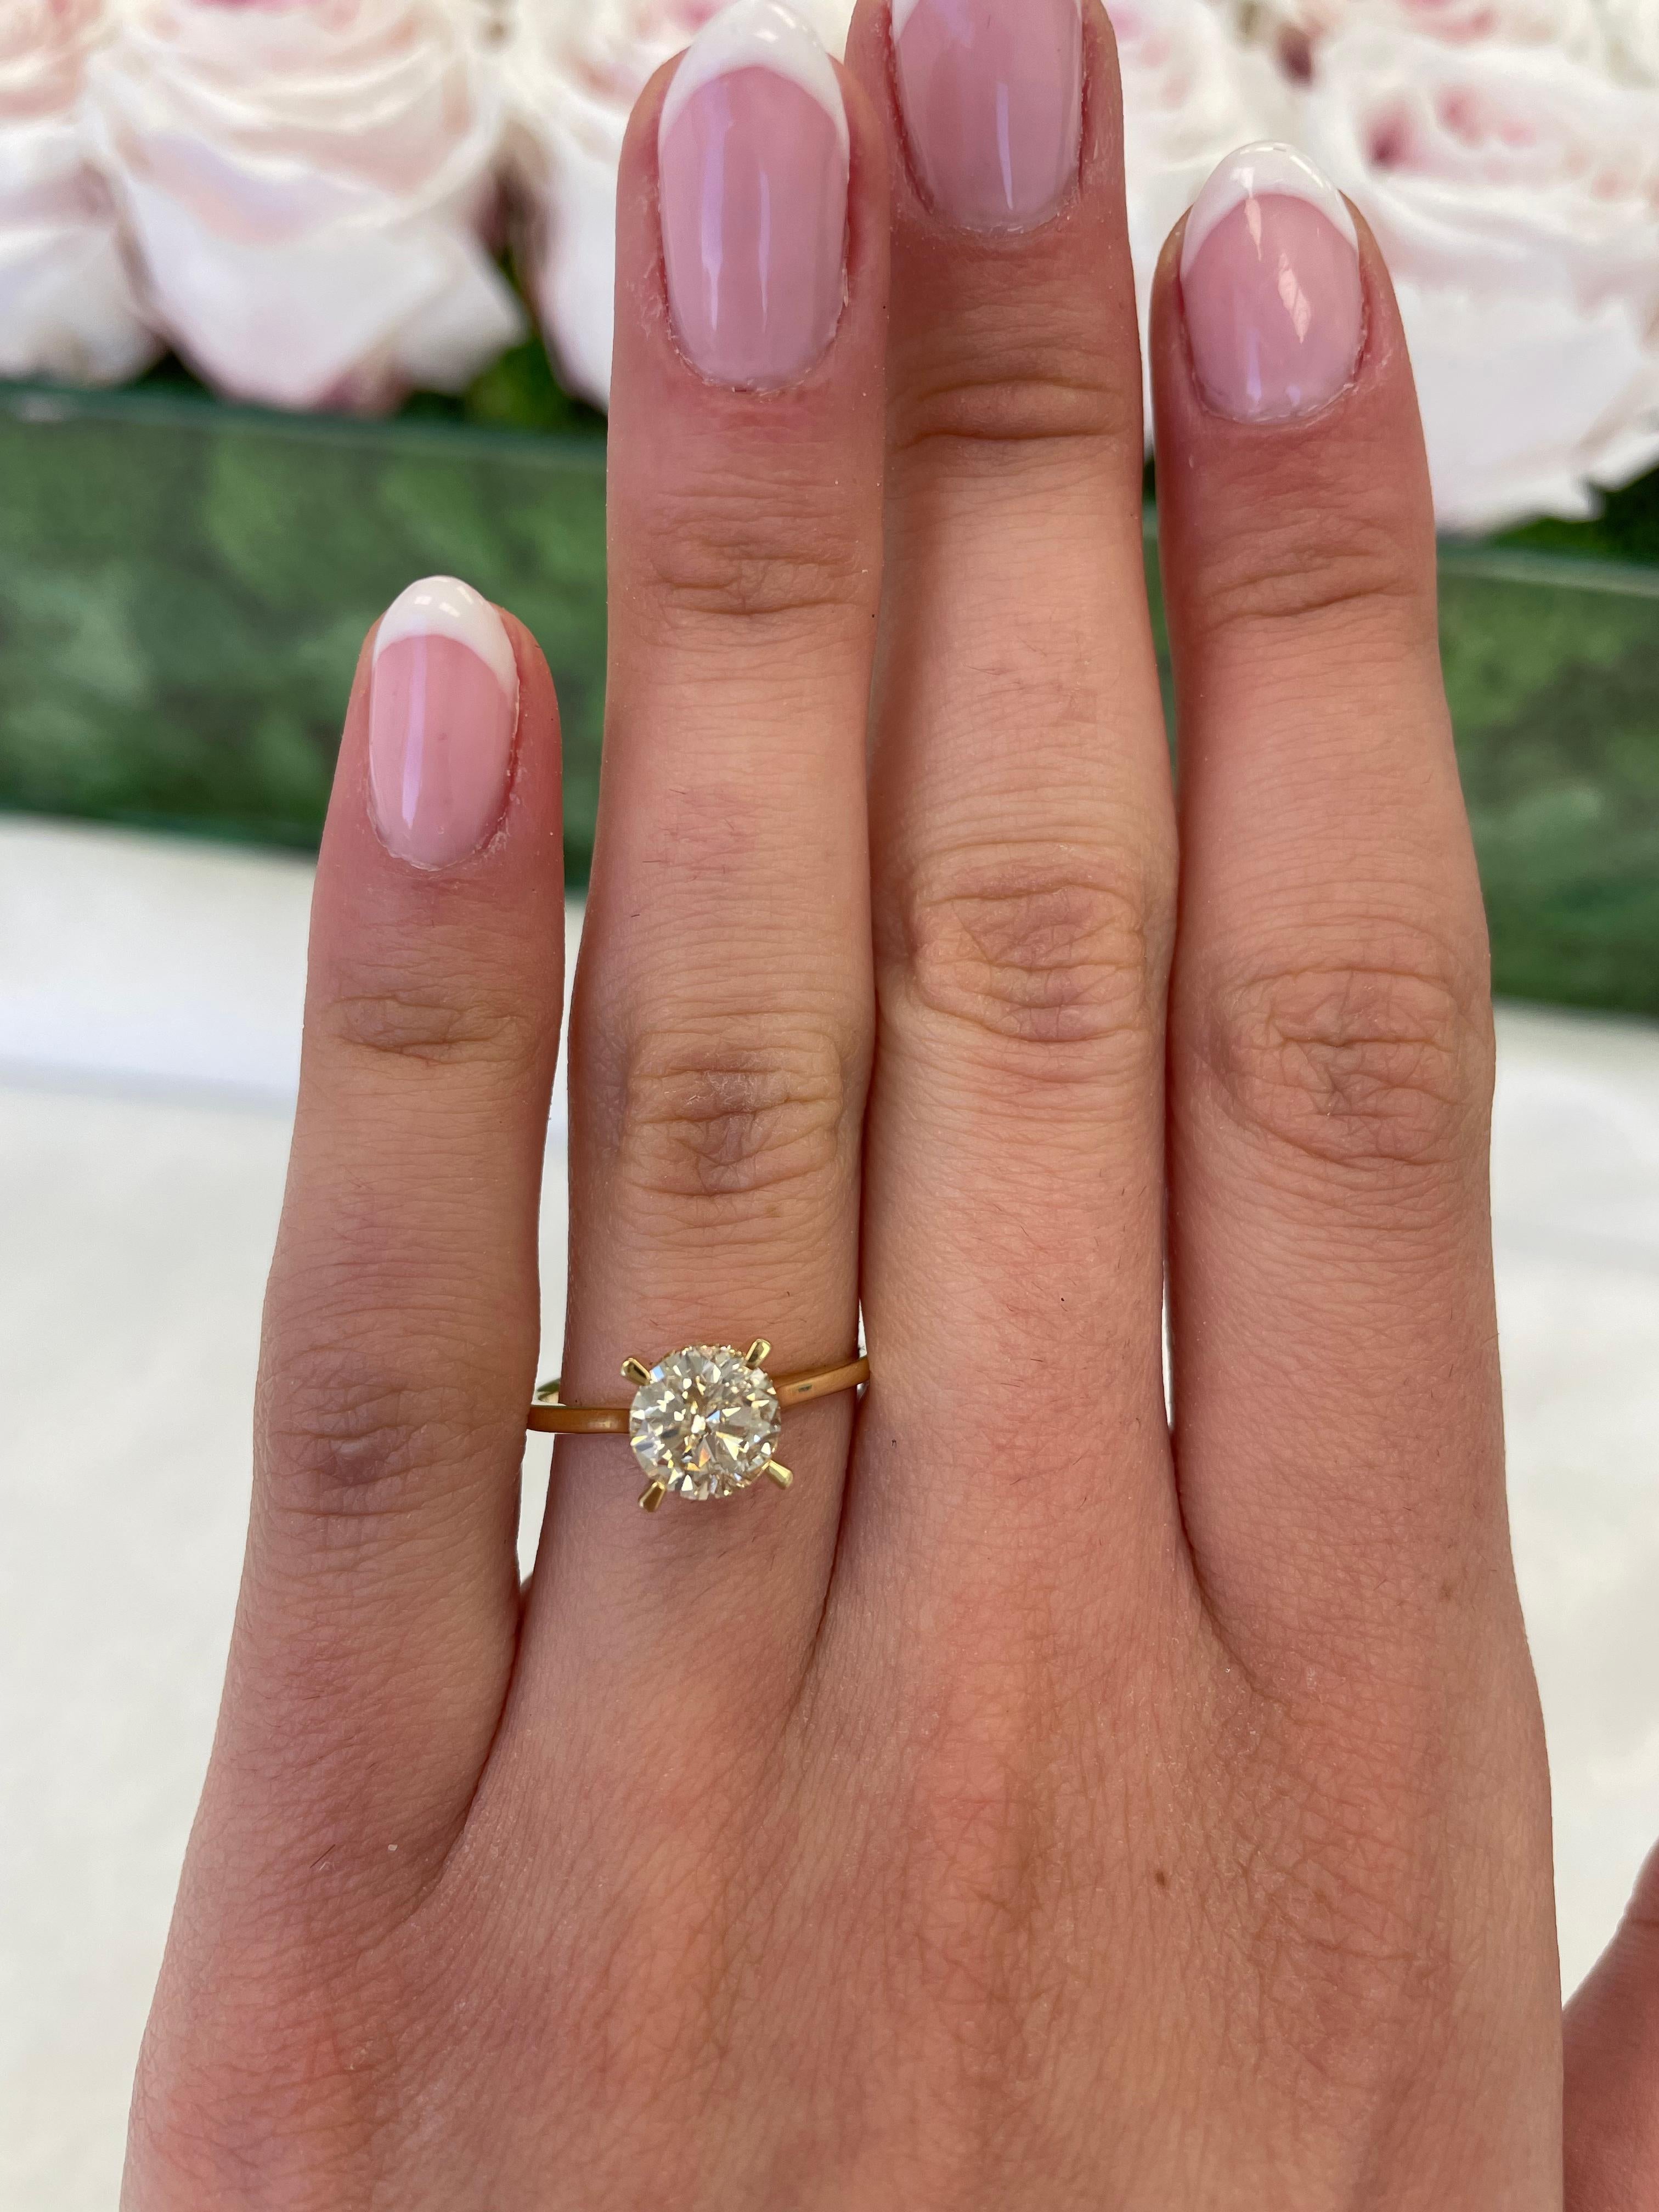 Classic solitaire diamond engagement ring with hidden halo.
1.43 carats total diamond weight.
1.21 carat round brilliant diamond, approximately I-K color grade and SI clarity grade. Complimented by 0.08 carats of round brilliant diamonds,